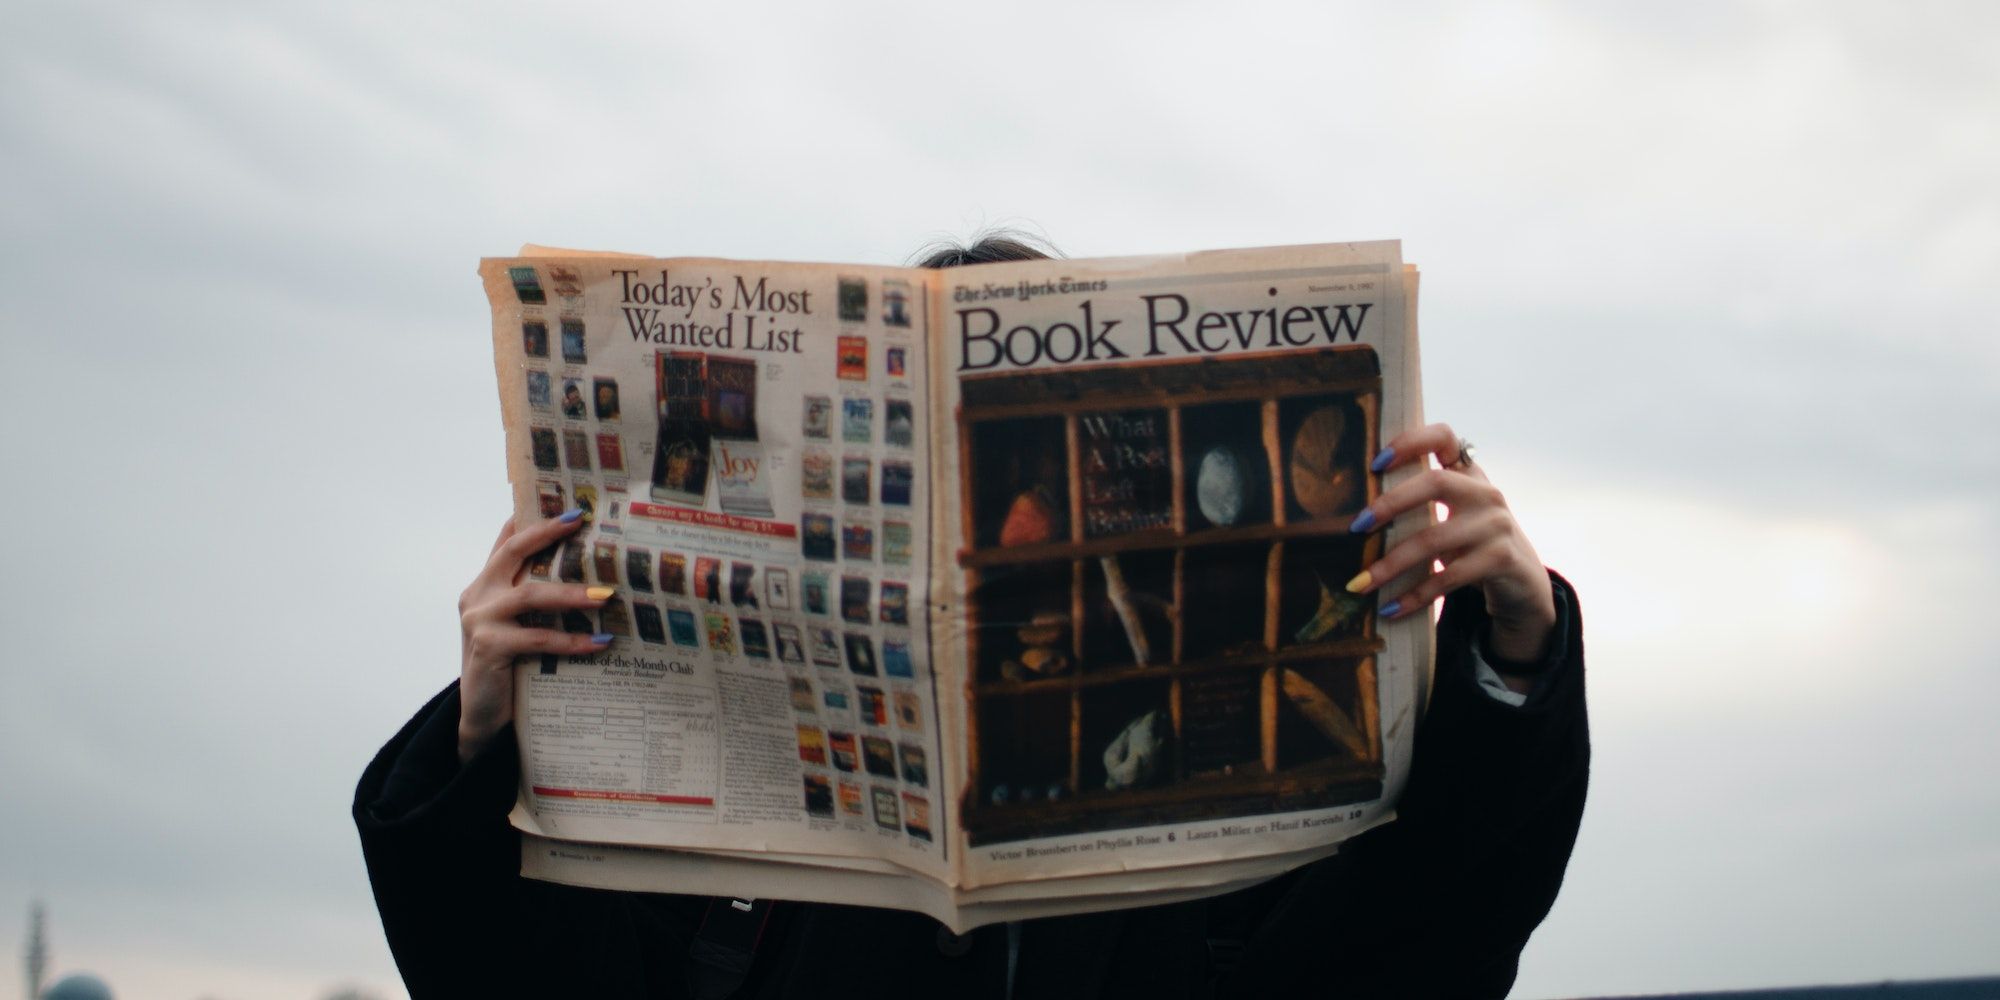 Person holding a newspaper cover with book reviews